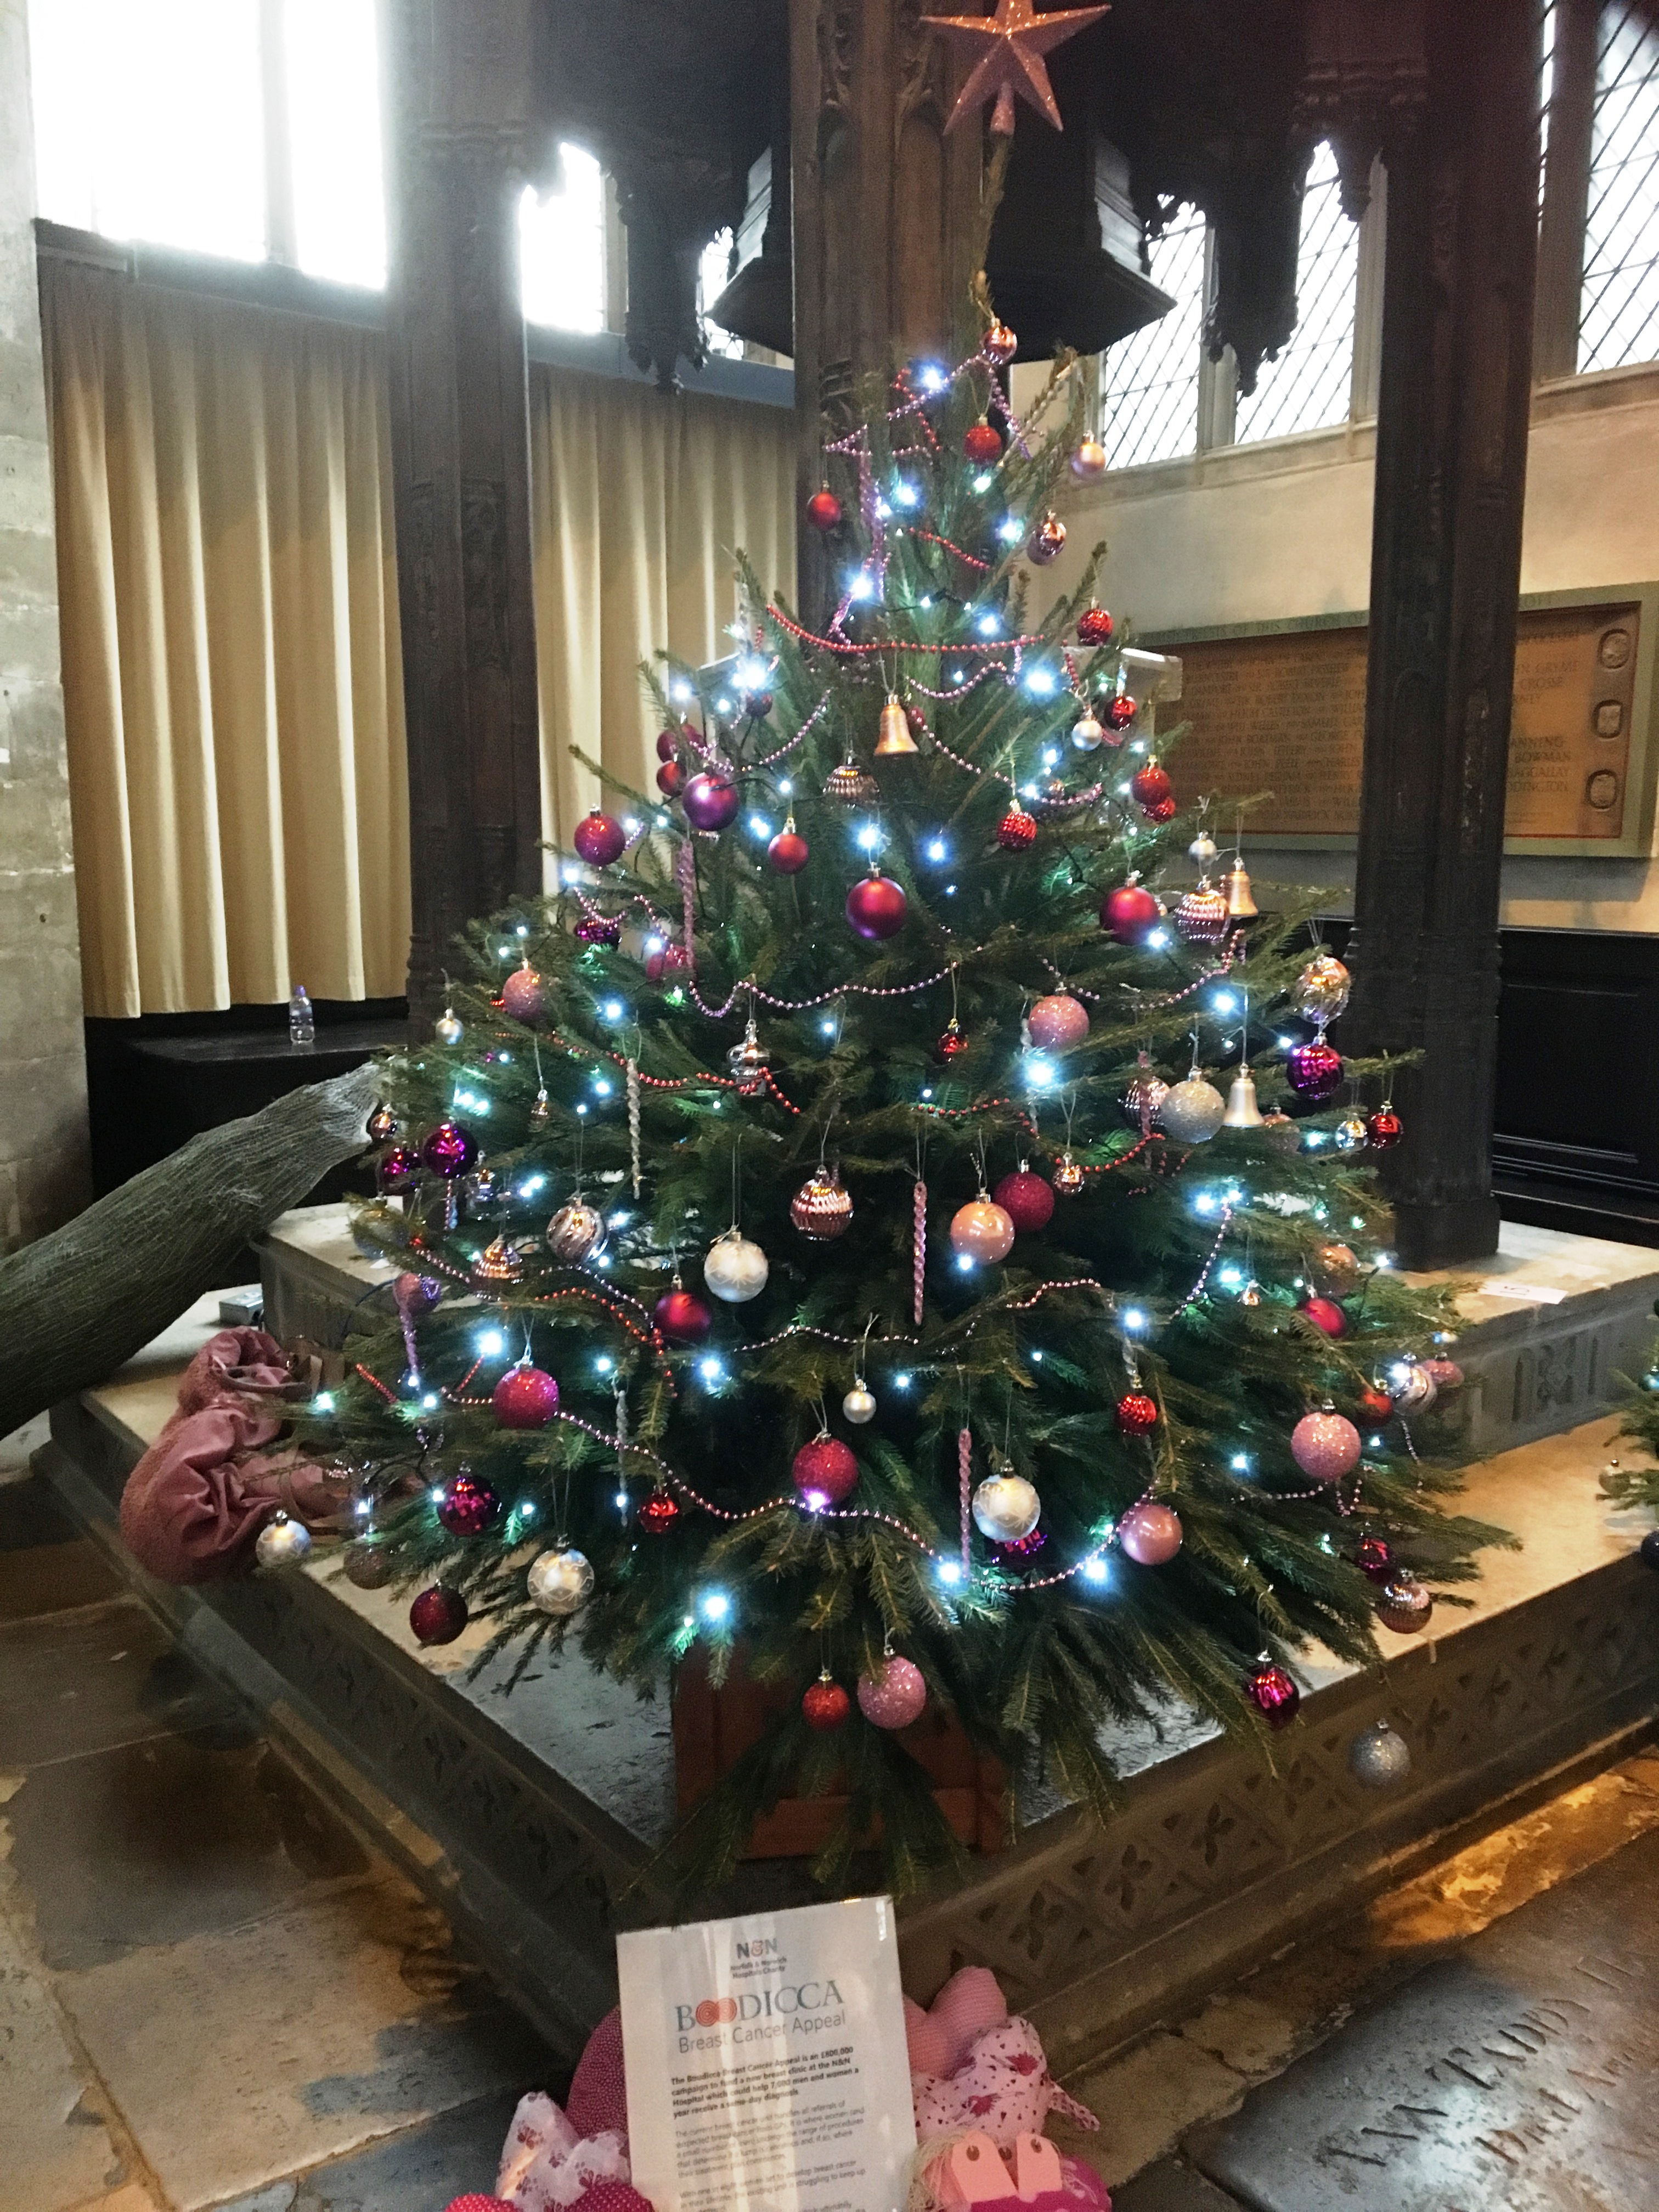 Christmas tree shines for breast cancer appeal